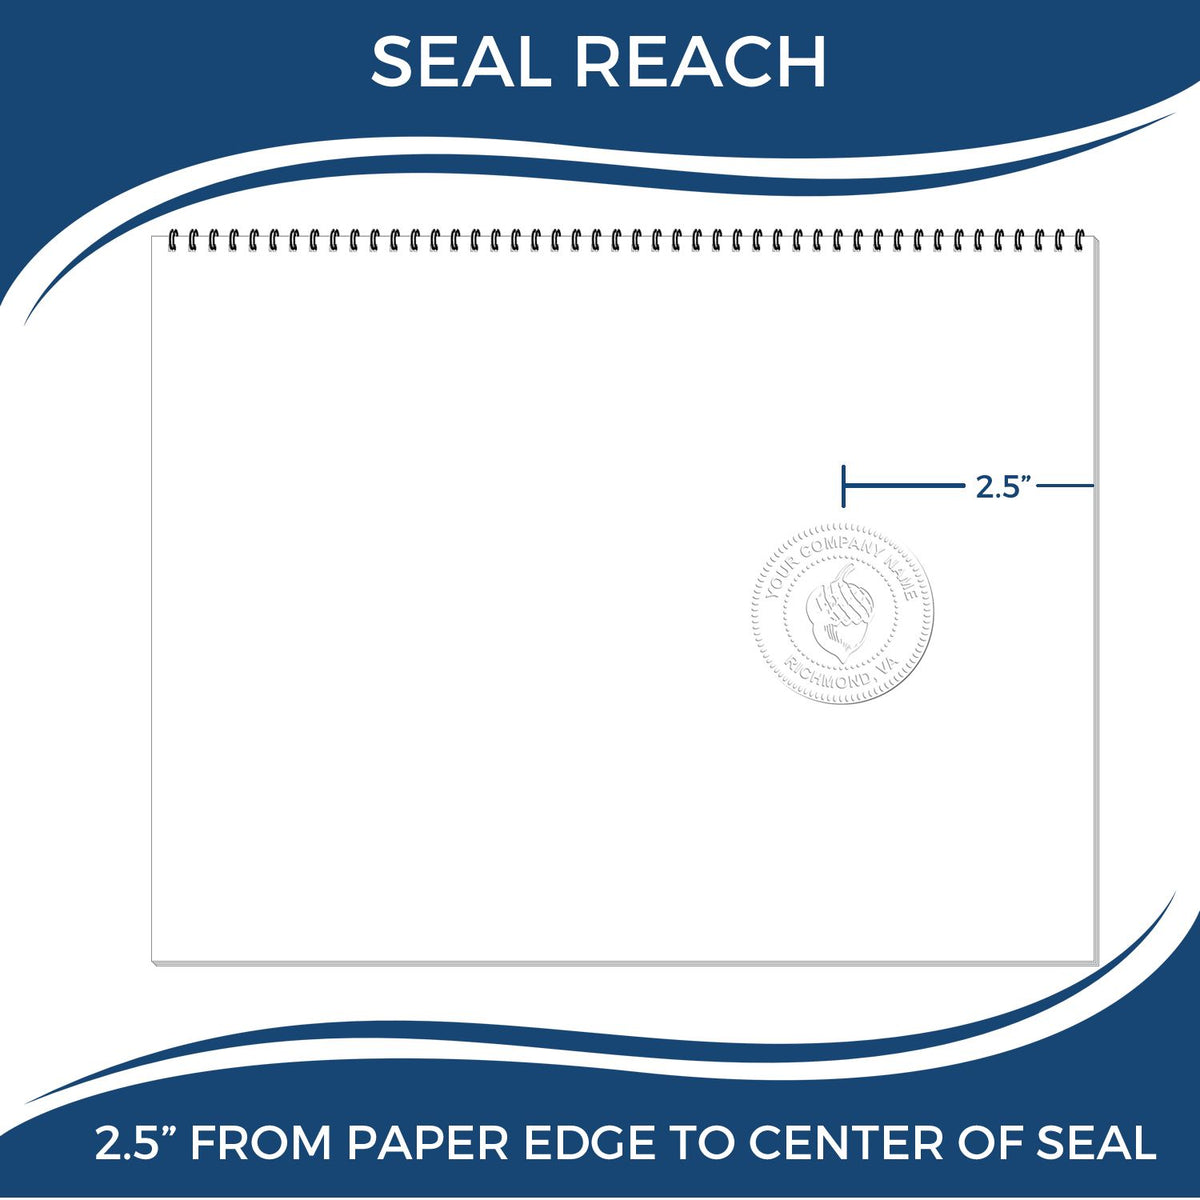 An infographic showing the seal reach which is represented by a ruler and a miniature seal image of the Heavy Duty Cast Iron Colorado Geologist Seal Embosser